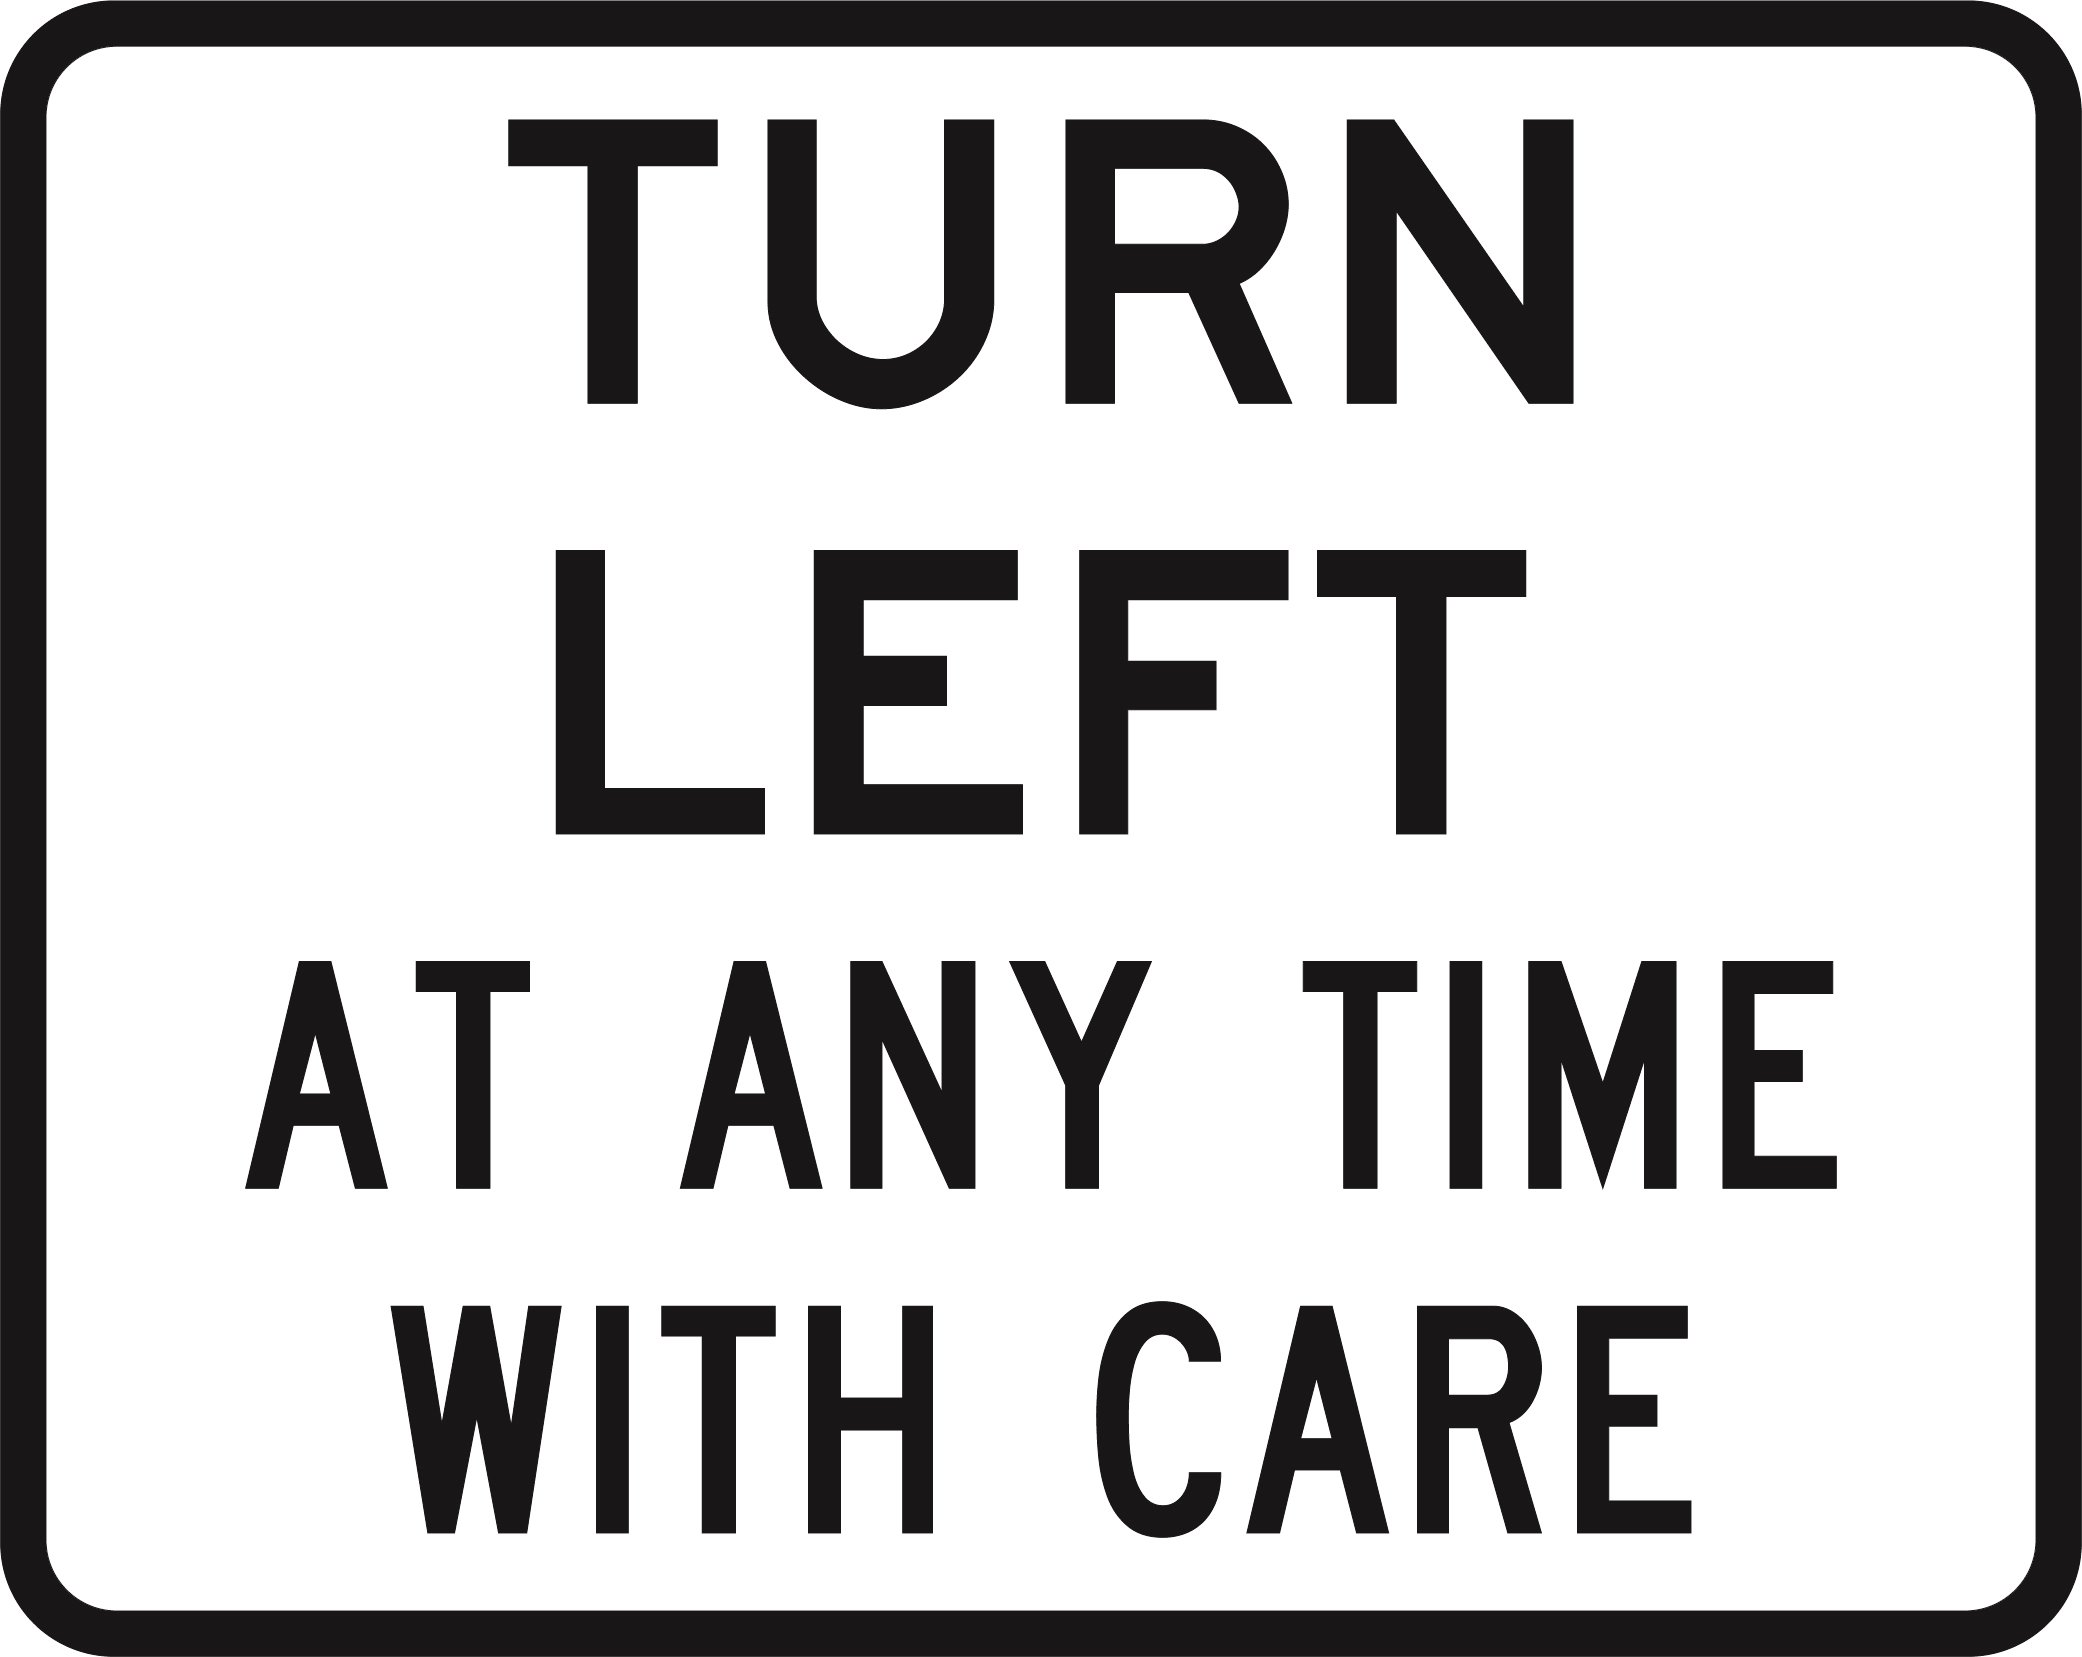 Turn Left At Any Time With Care - 750x600 - Bl/Whi